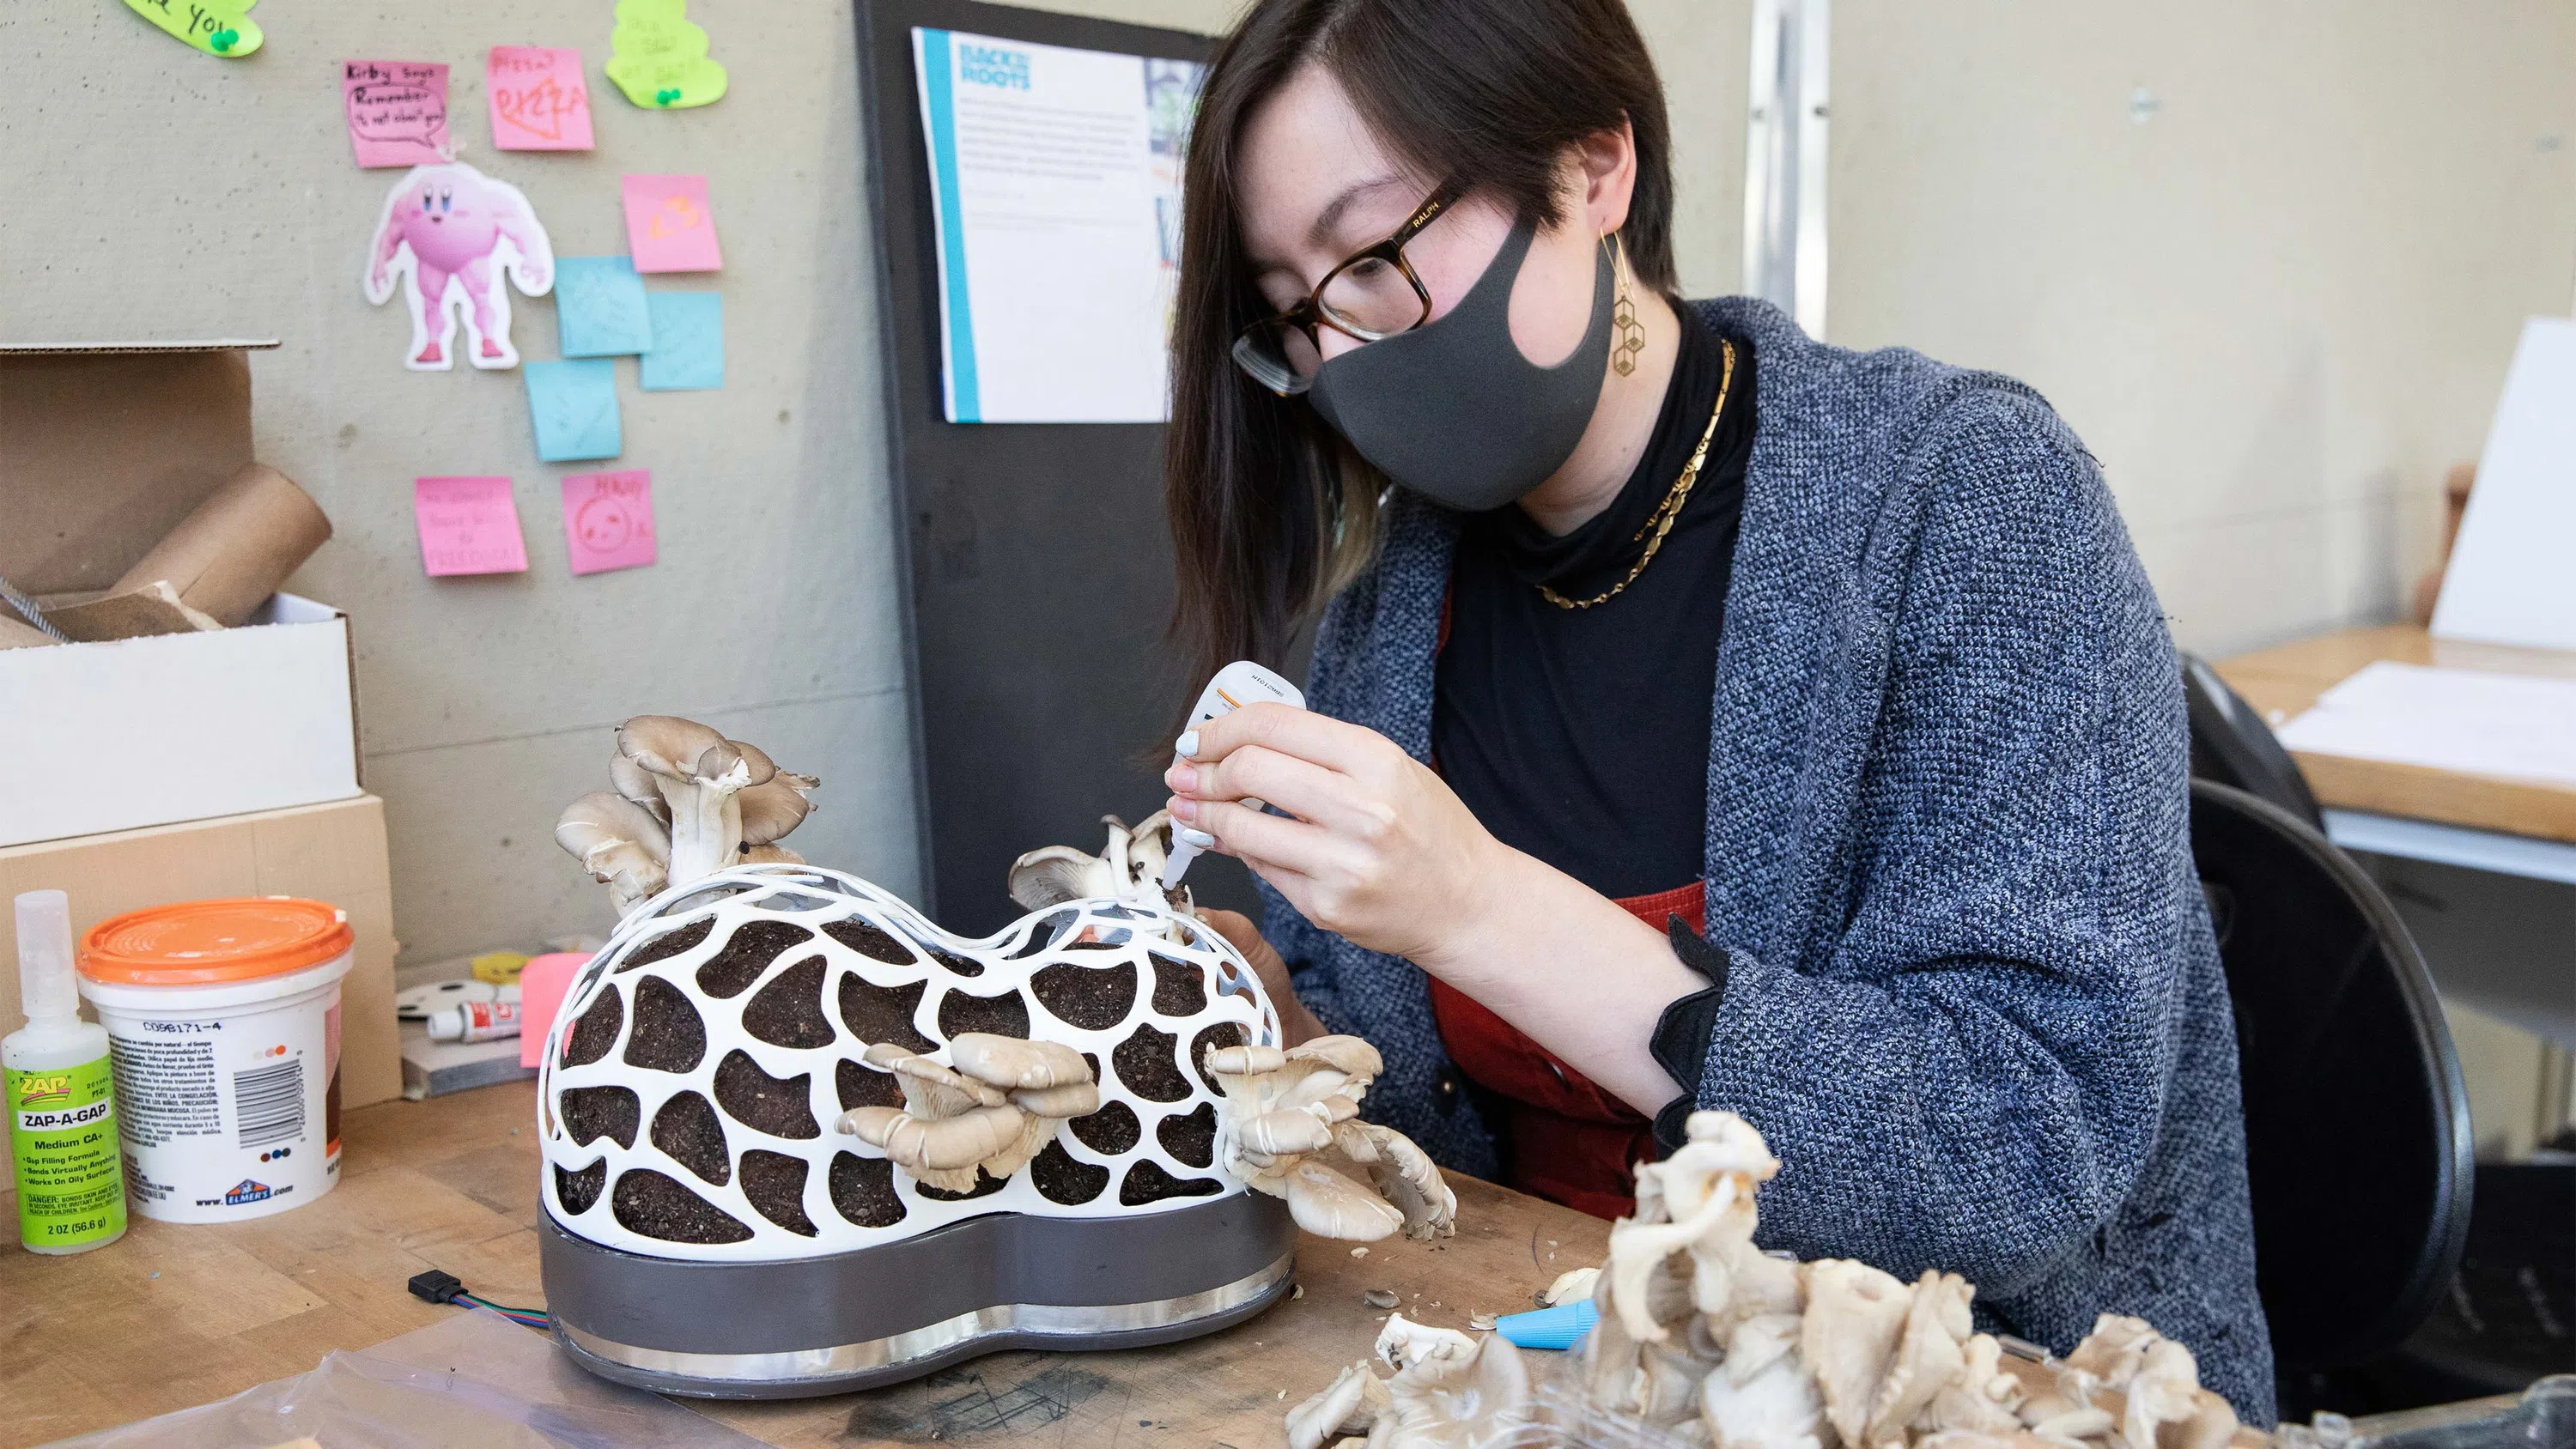 A student glues mushrooms onto an organic sculpture in the Industrial Design studios.